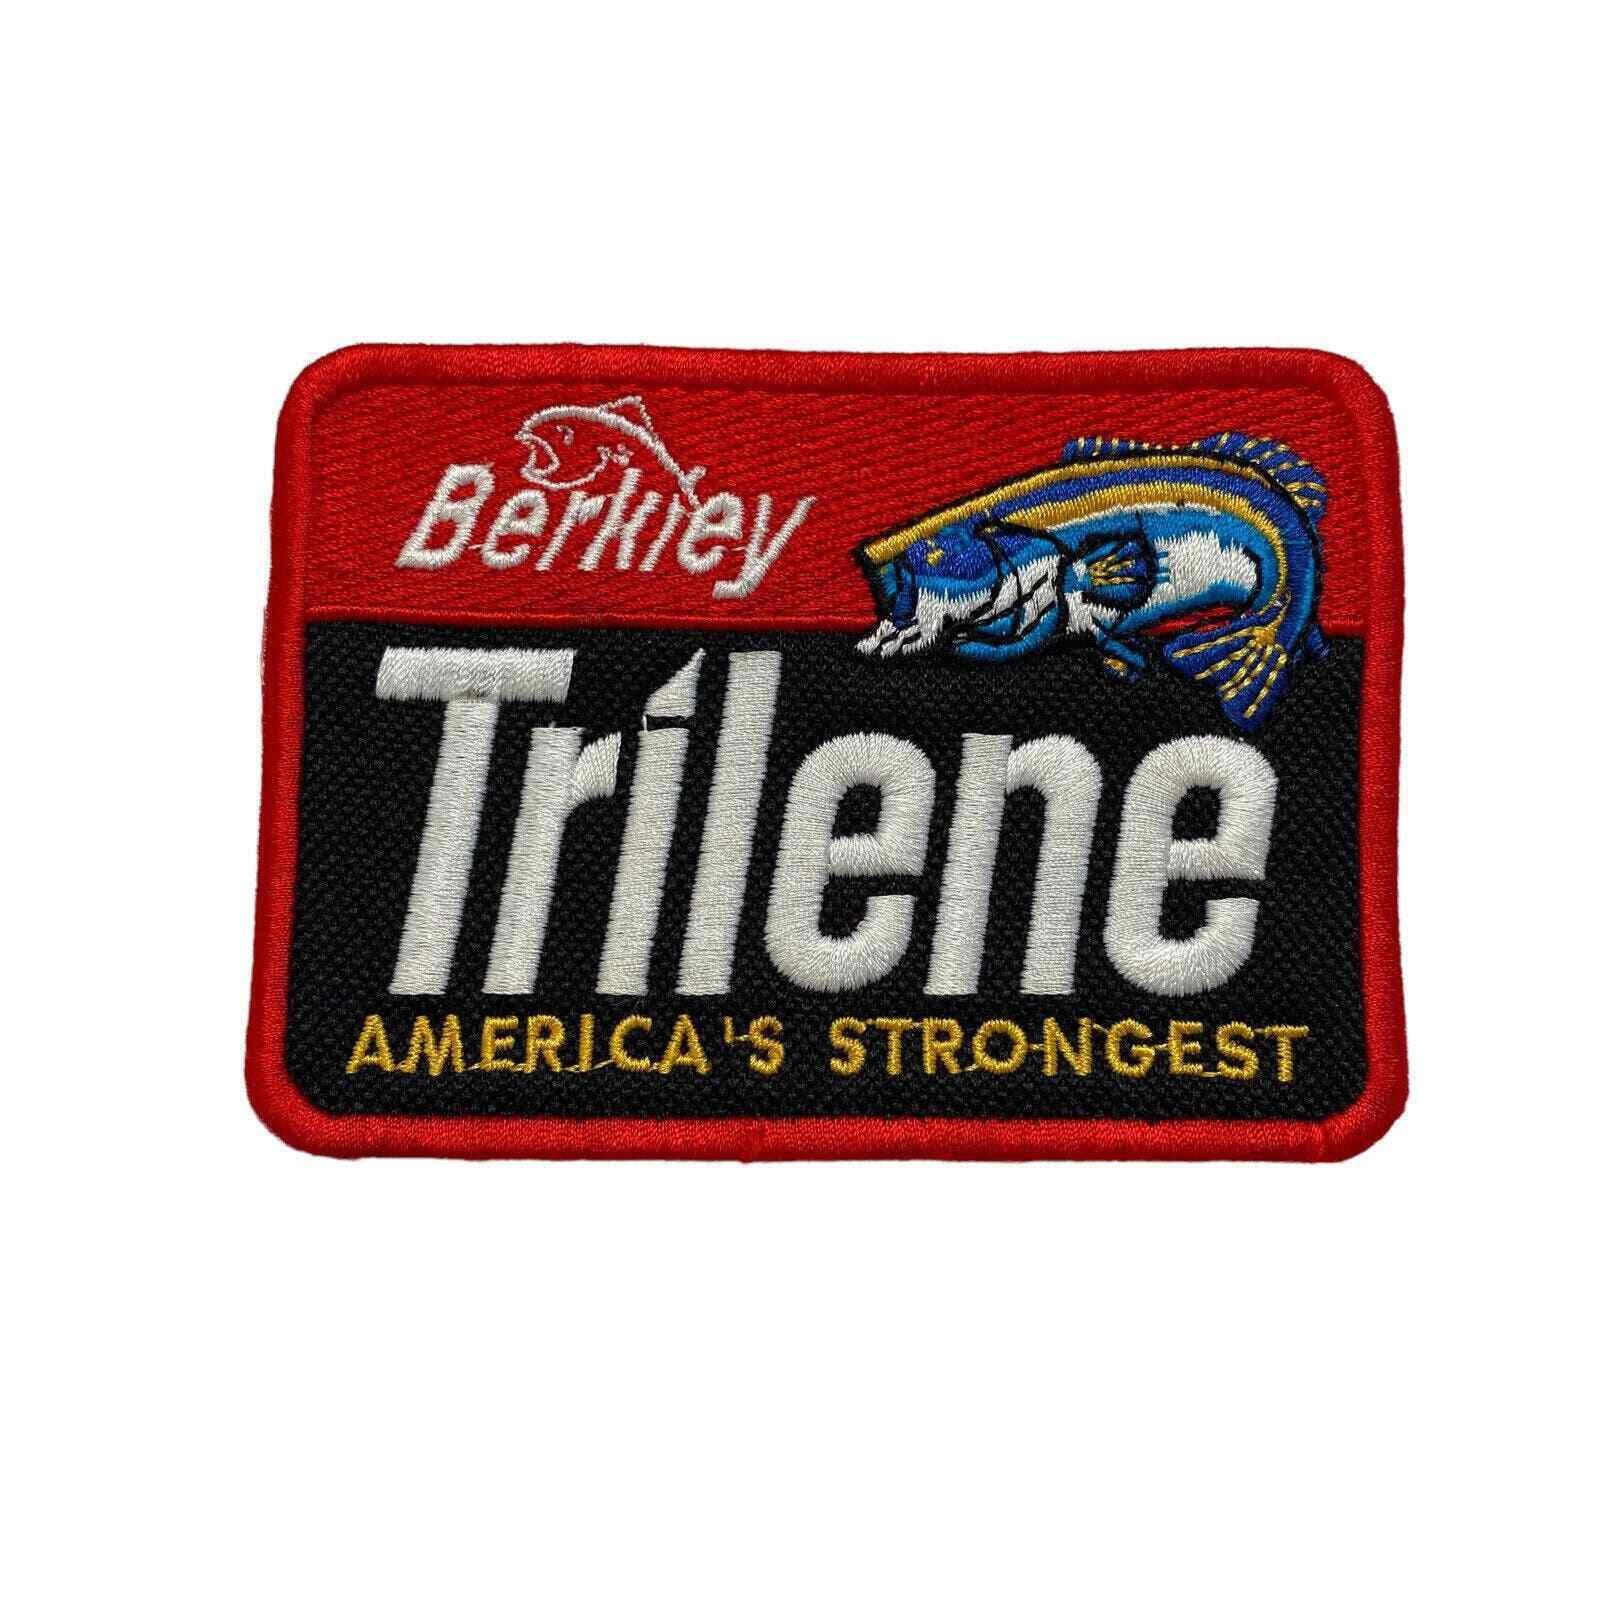 BERKLEY Trilene America’s Strongest Embroidered Patch Red Fishing Fish Logo